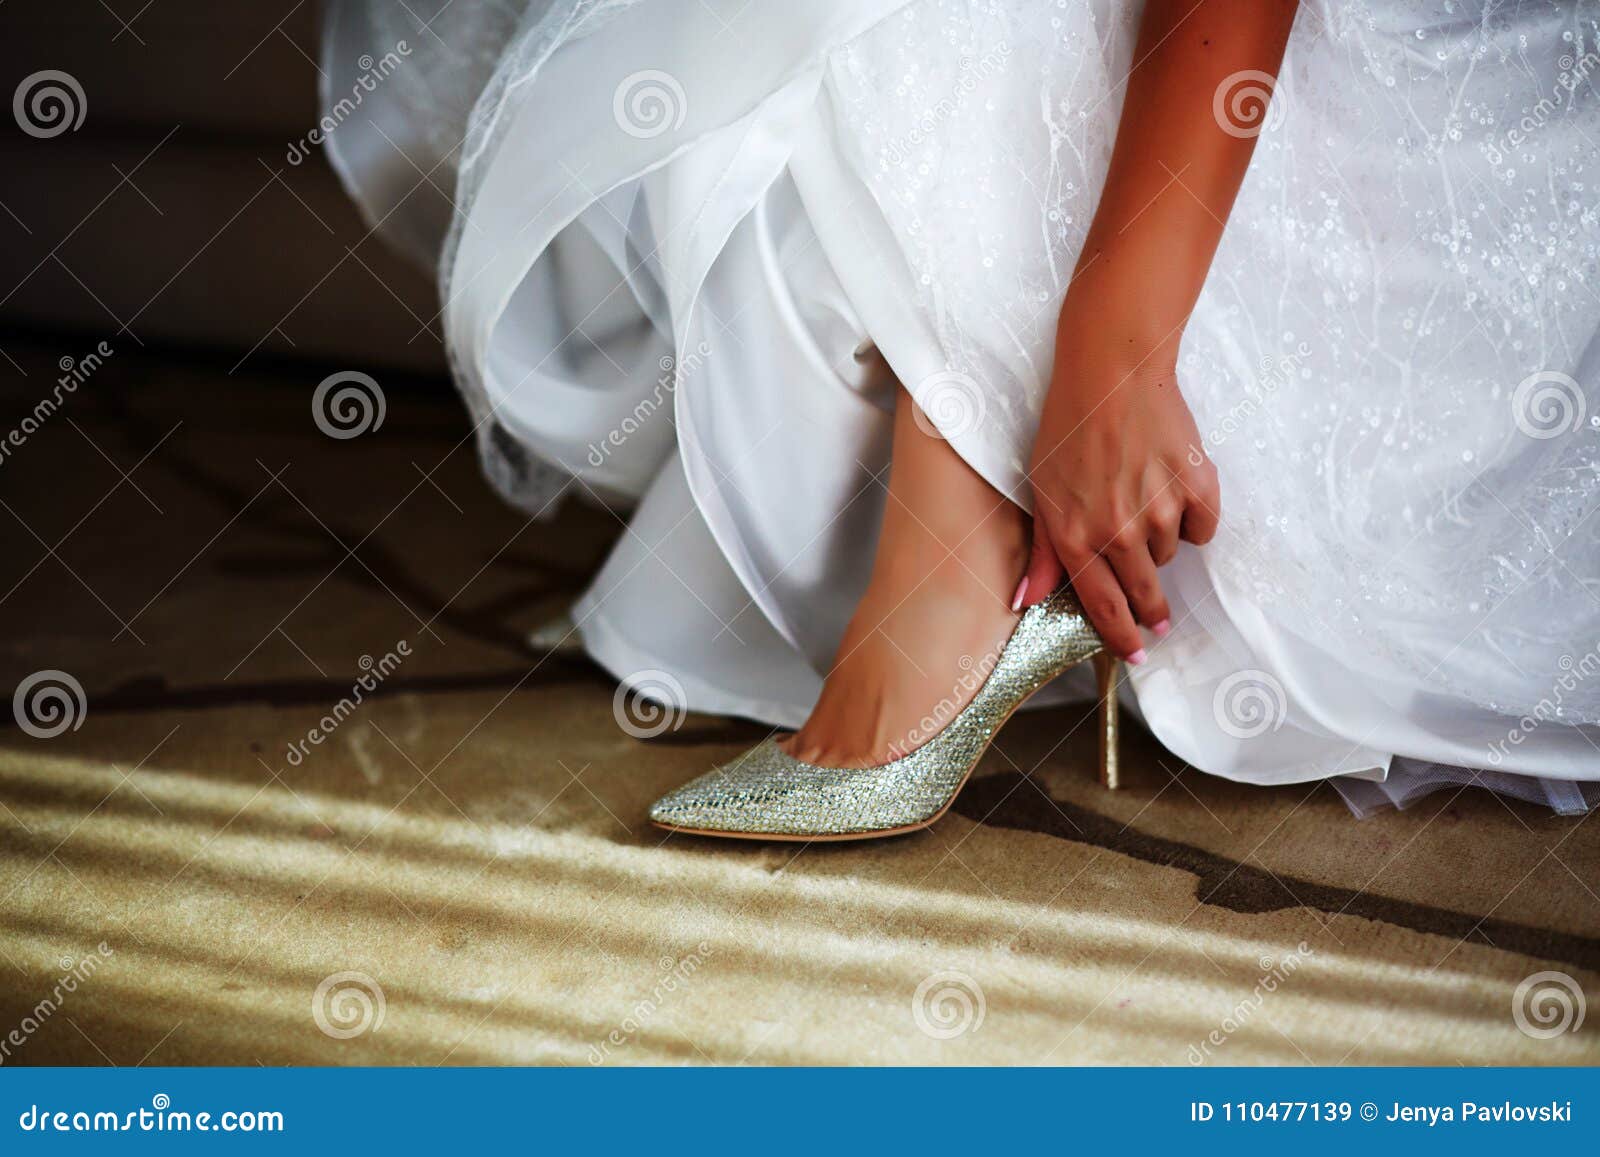 Bride in White Wedding Dress Putting on Silver Shoes Stock Image ...